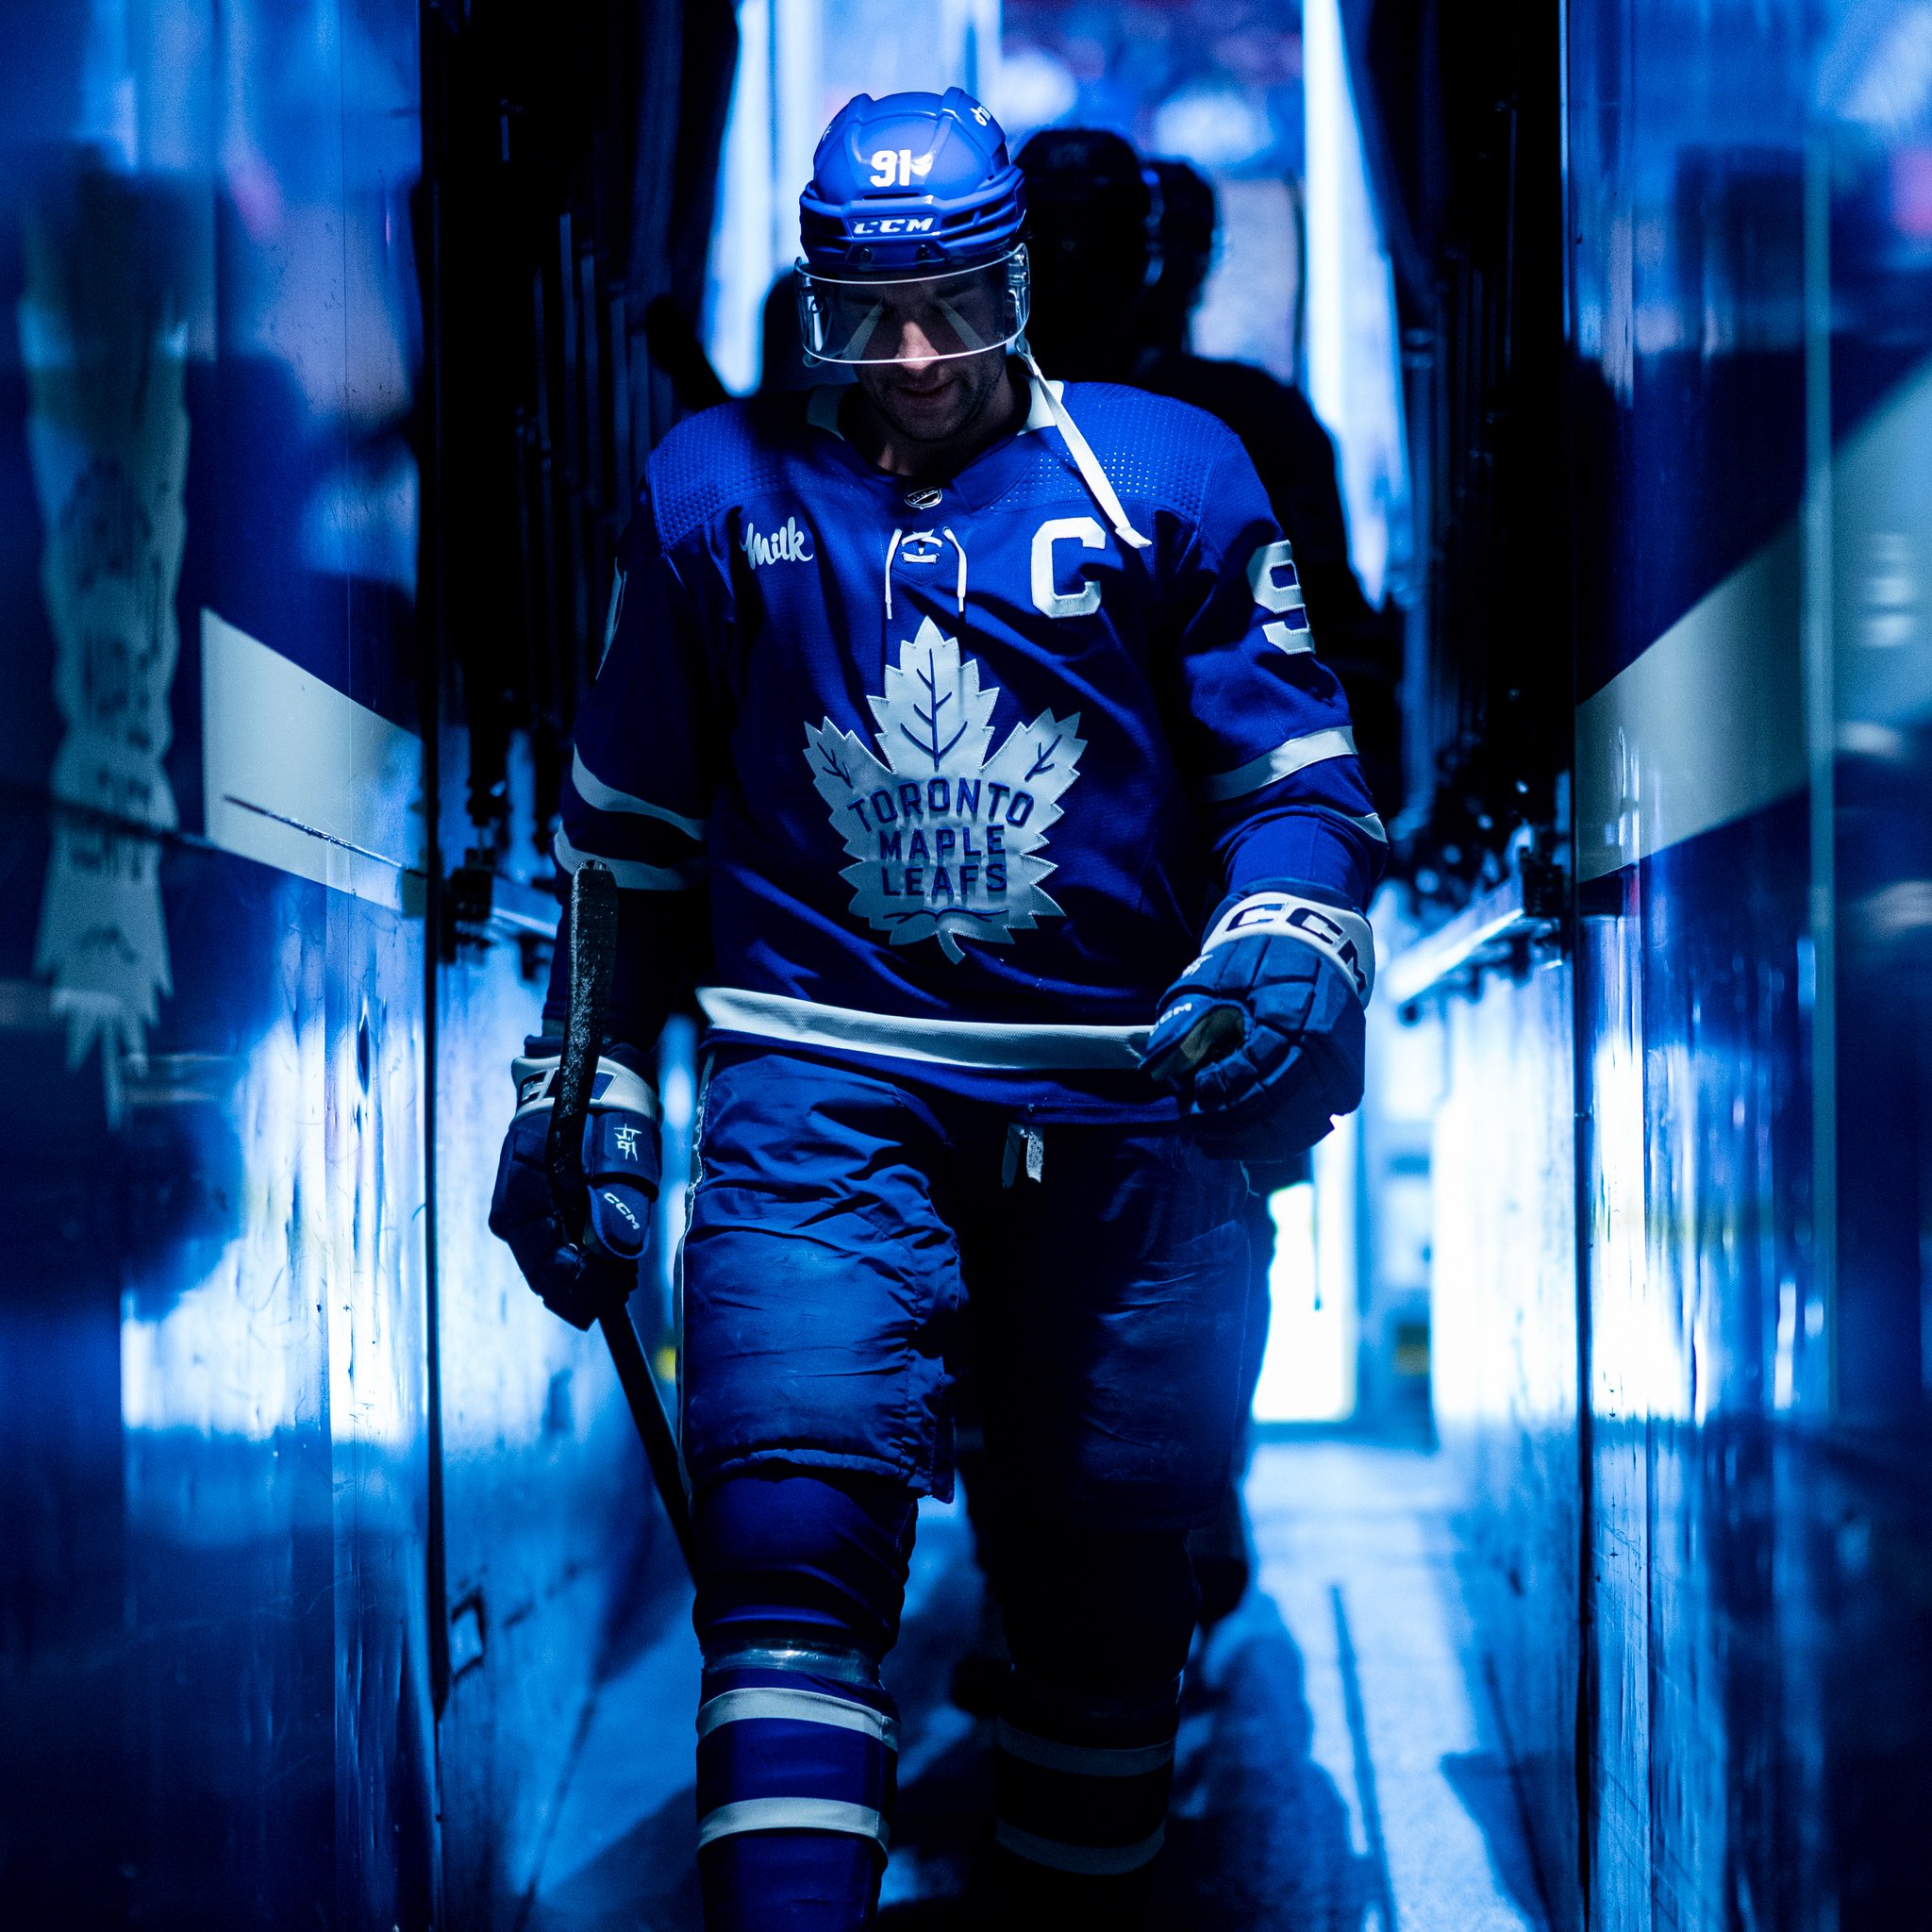 Magazine - LADIES AND GENTLEMAN THE FIRST PLACE LEAFS